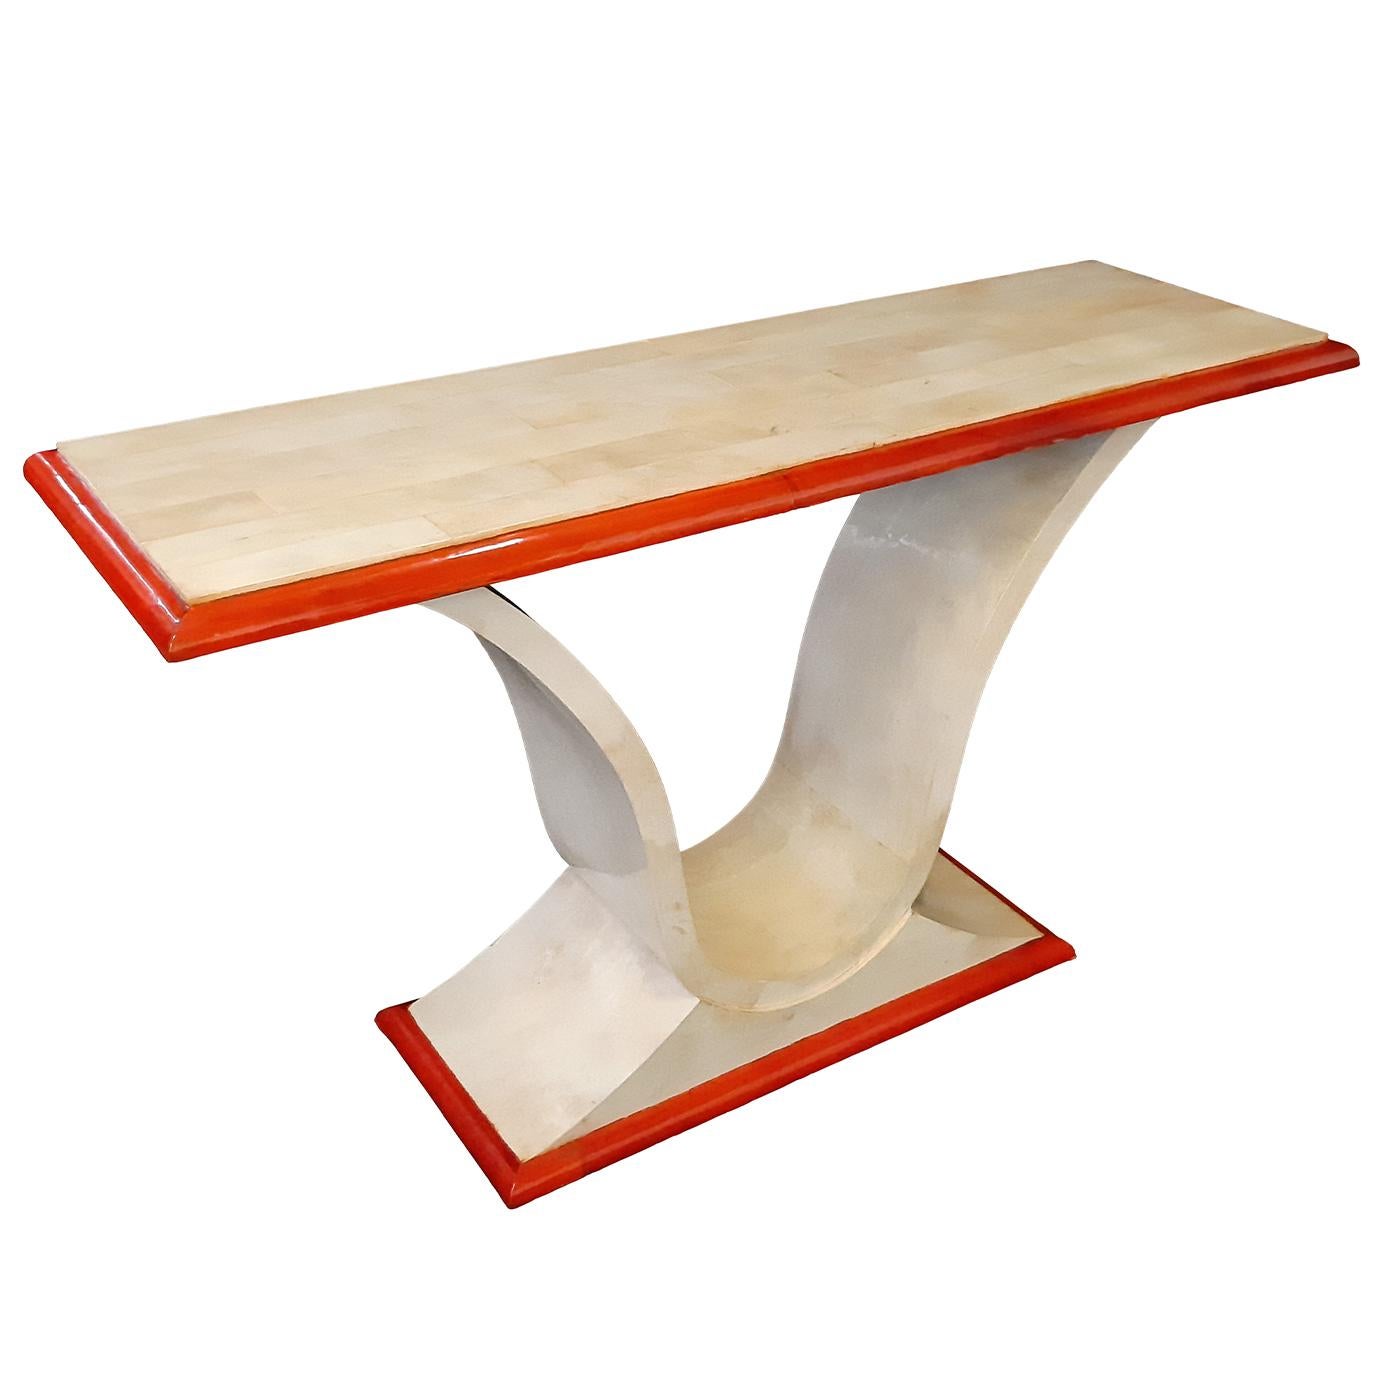 This Art Deco-inspired console couples taste for prized, traditional techniques with a vibrant chromatic twist, red-hued parchment covering the top, and base frames. First-rate natural parchment in a versatile shade of ivory envelopes in a tight